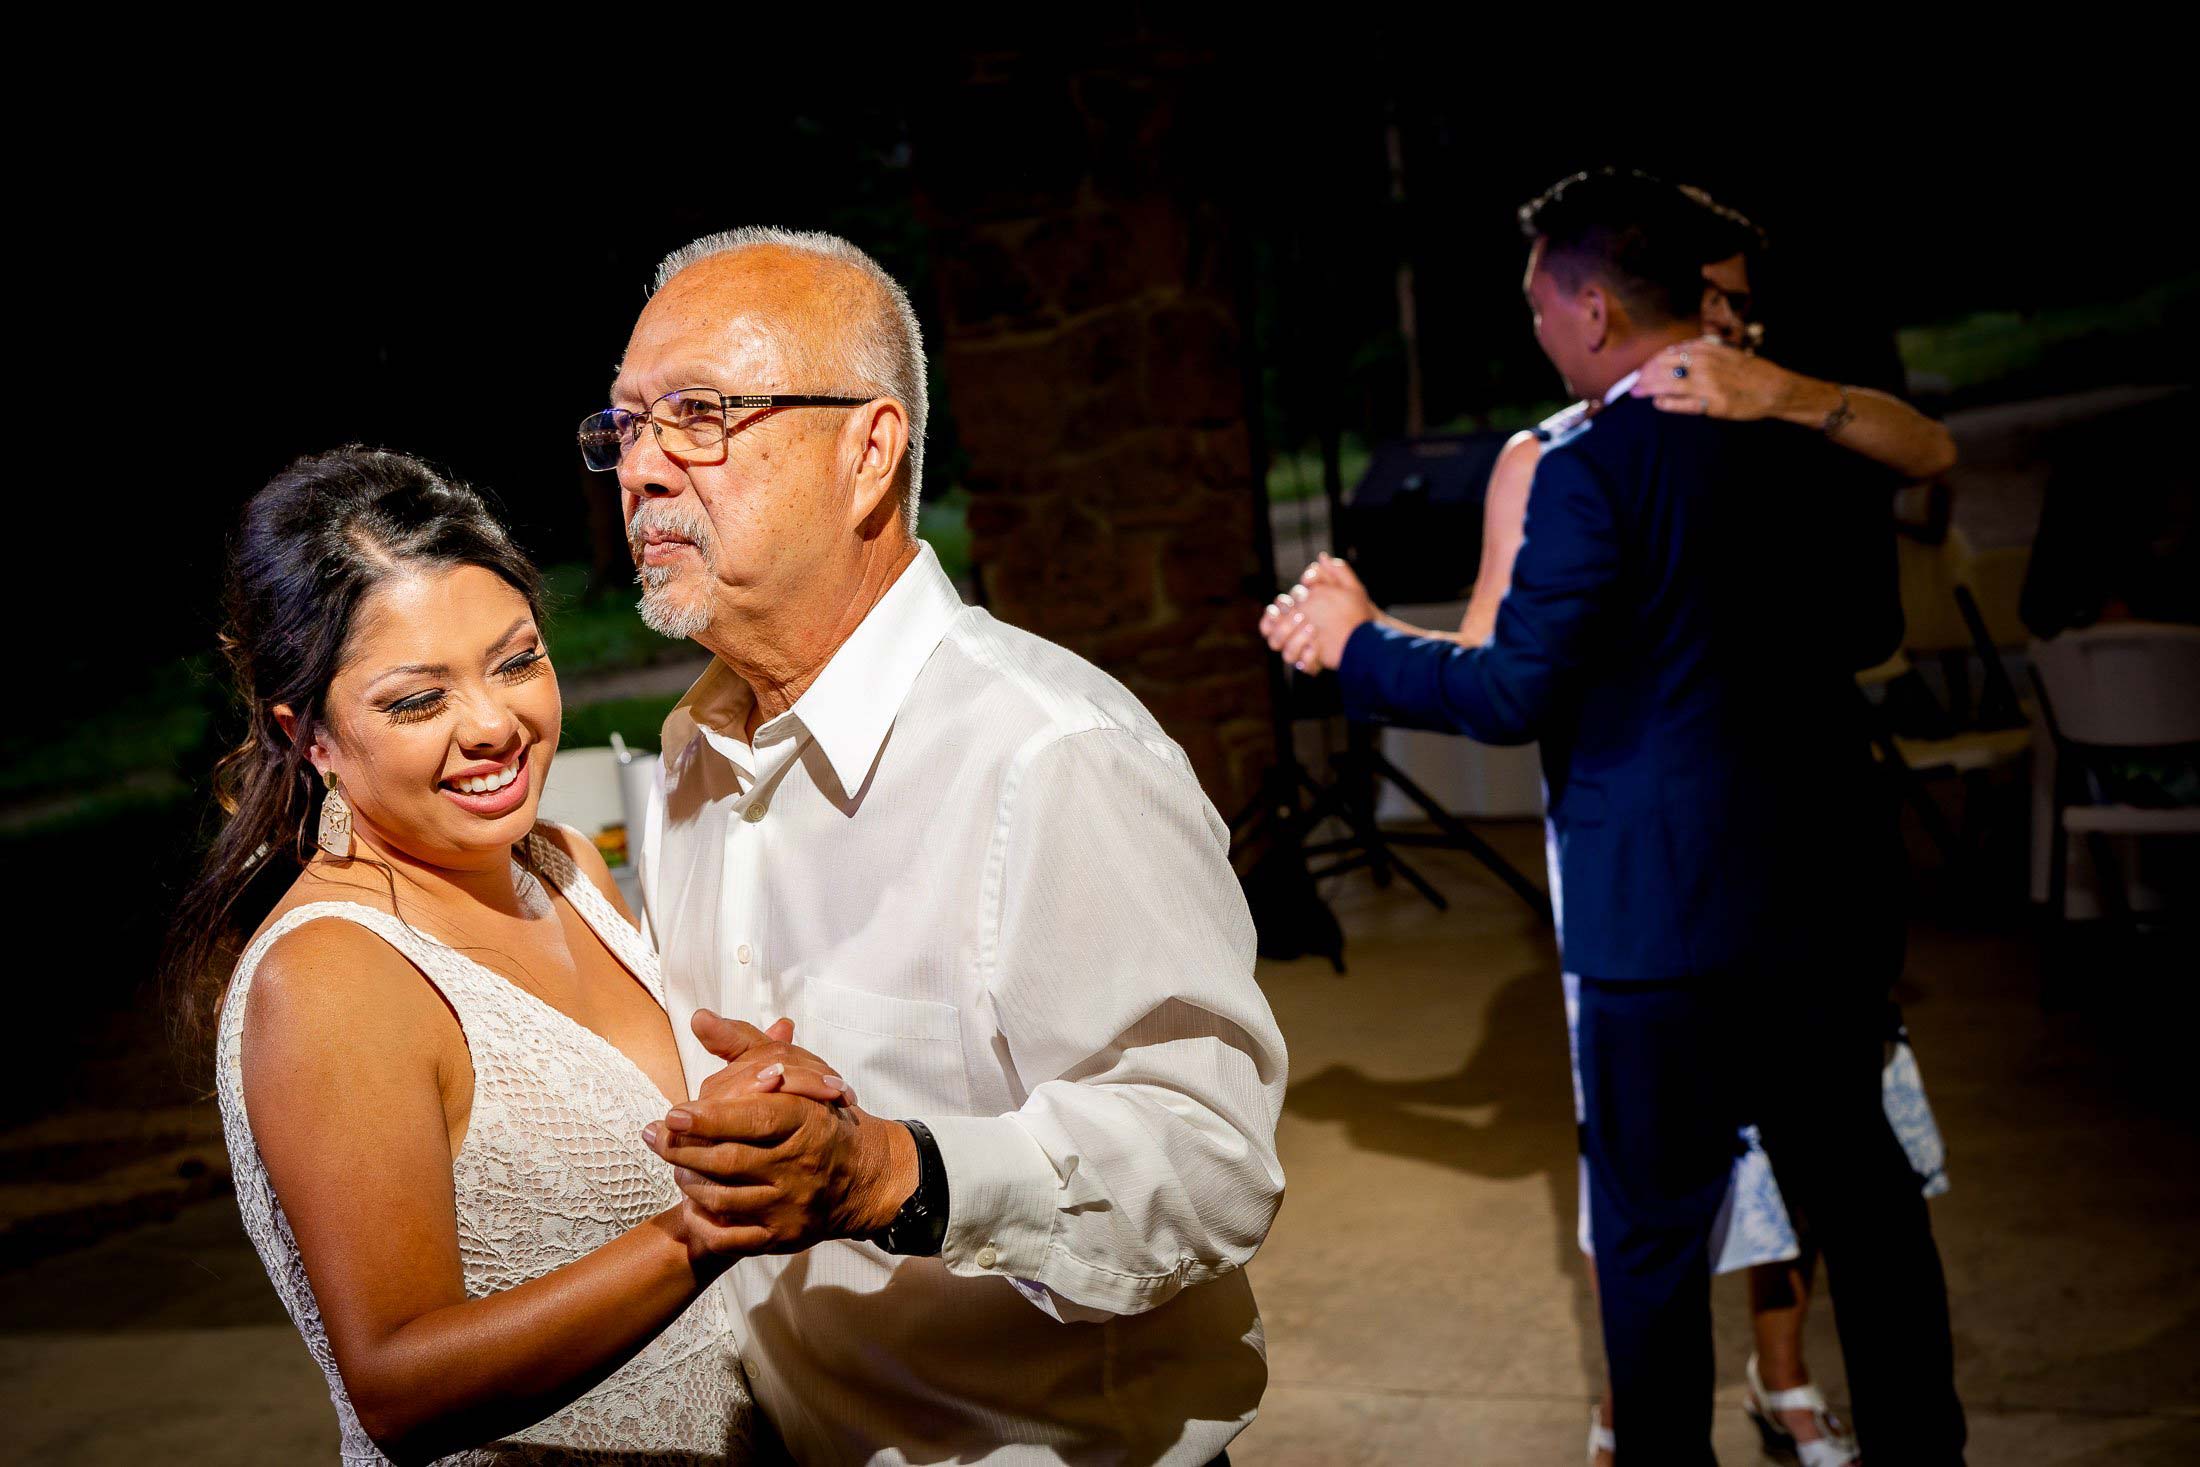 Bride shares a first dance with her father during the wedding reception, wedding photos, wedding photography, wedding photographer, wedding inspiration, wedding photo inspiration, mountain wedding, YMCA of the Rockies wedding, YMCA of the Rockies wedding photos, YMCA of the Rockies wedding photography, YMCA of the Rockies wedding photographer, YMCA of the Rockies wedding inspiration, YMCA of the Rockies wedding venue, Estes Park wedding, Estes Park wedding photos, Estes Park wedding photography, Estes Park wedding photographer, Colorado wedding, Colorado wedding photos, Colorado wedding photography, Colorado wedding photographer, Colorado mountain wedding, Colorado wedding inspiration